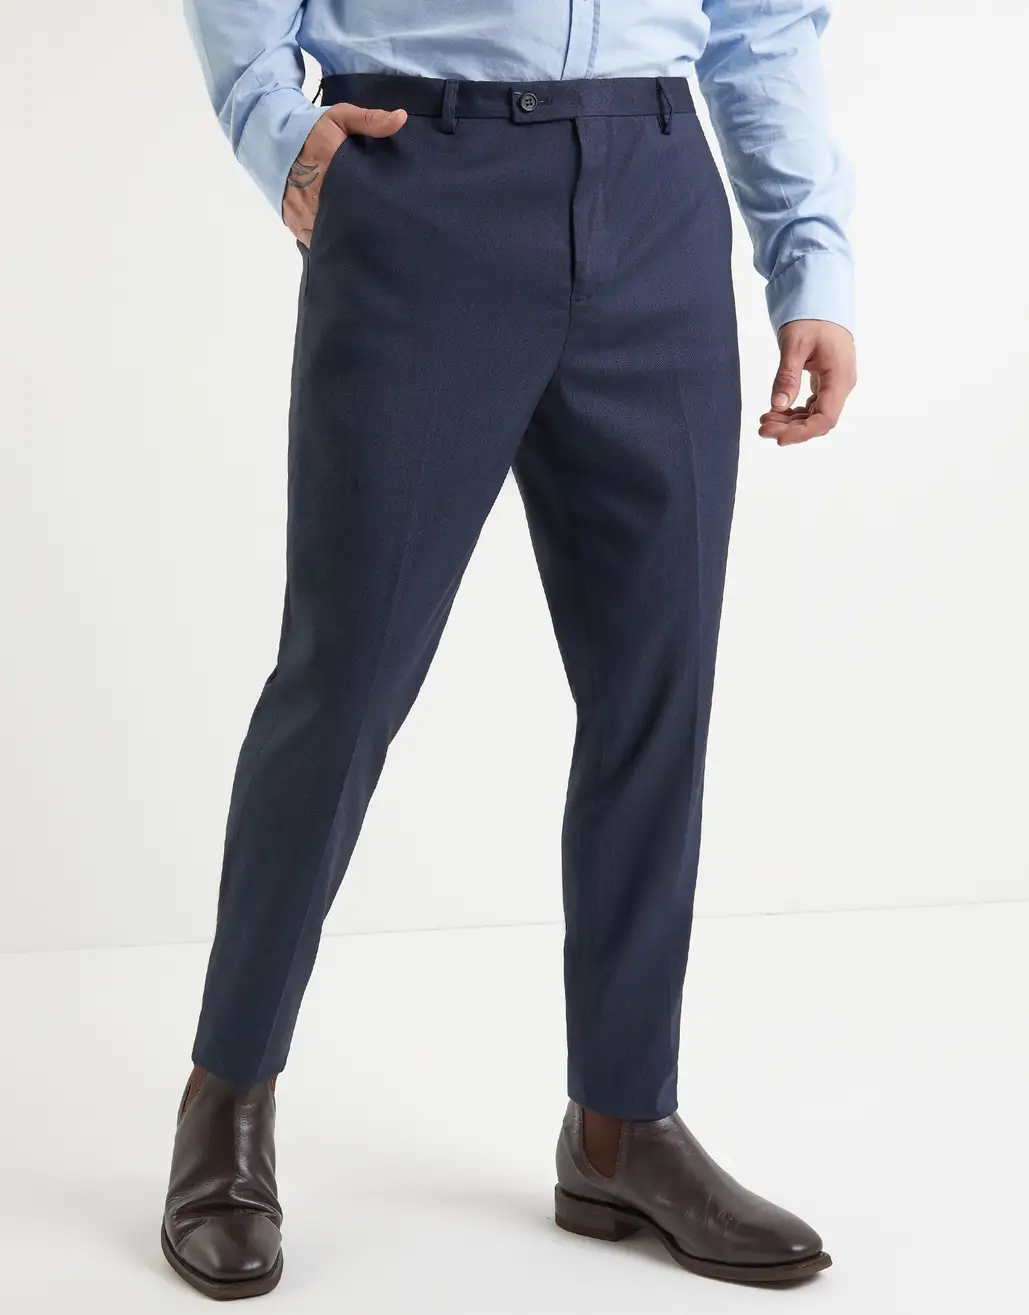 hallenstein brothers - SKINNY FIT STRETCH SUIT PANTS IN NAVY | Modvisor